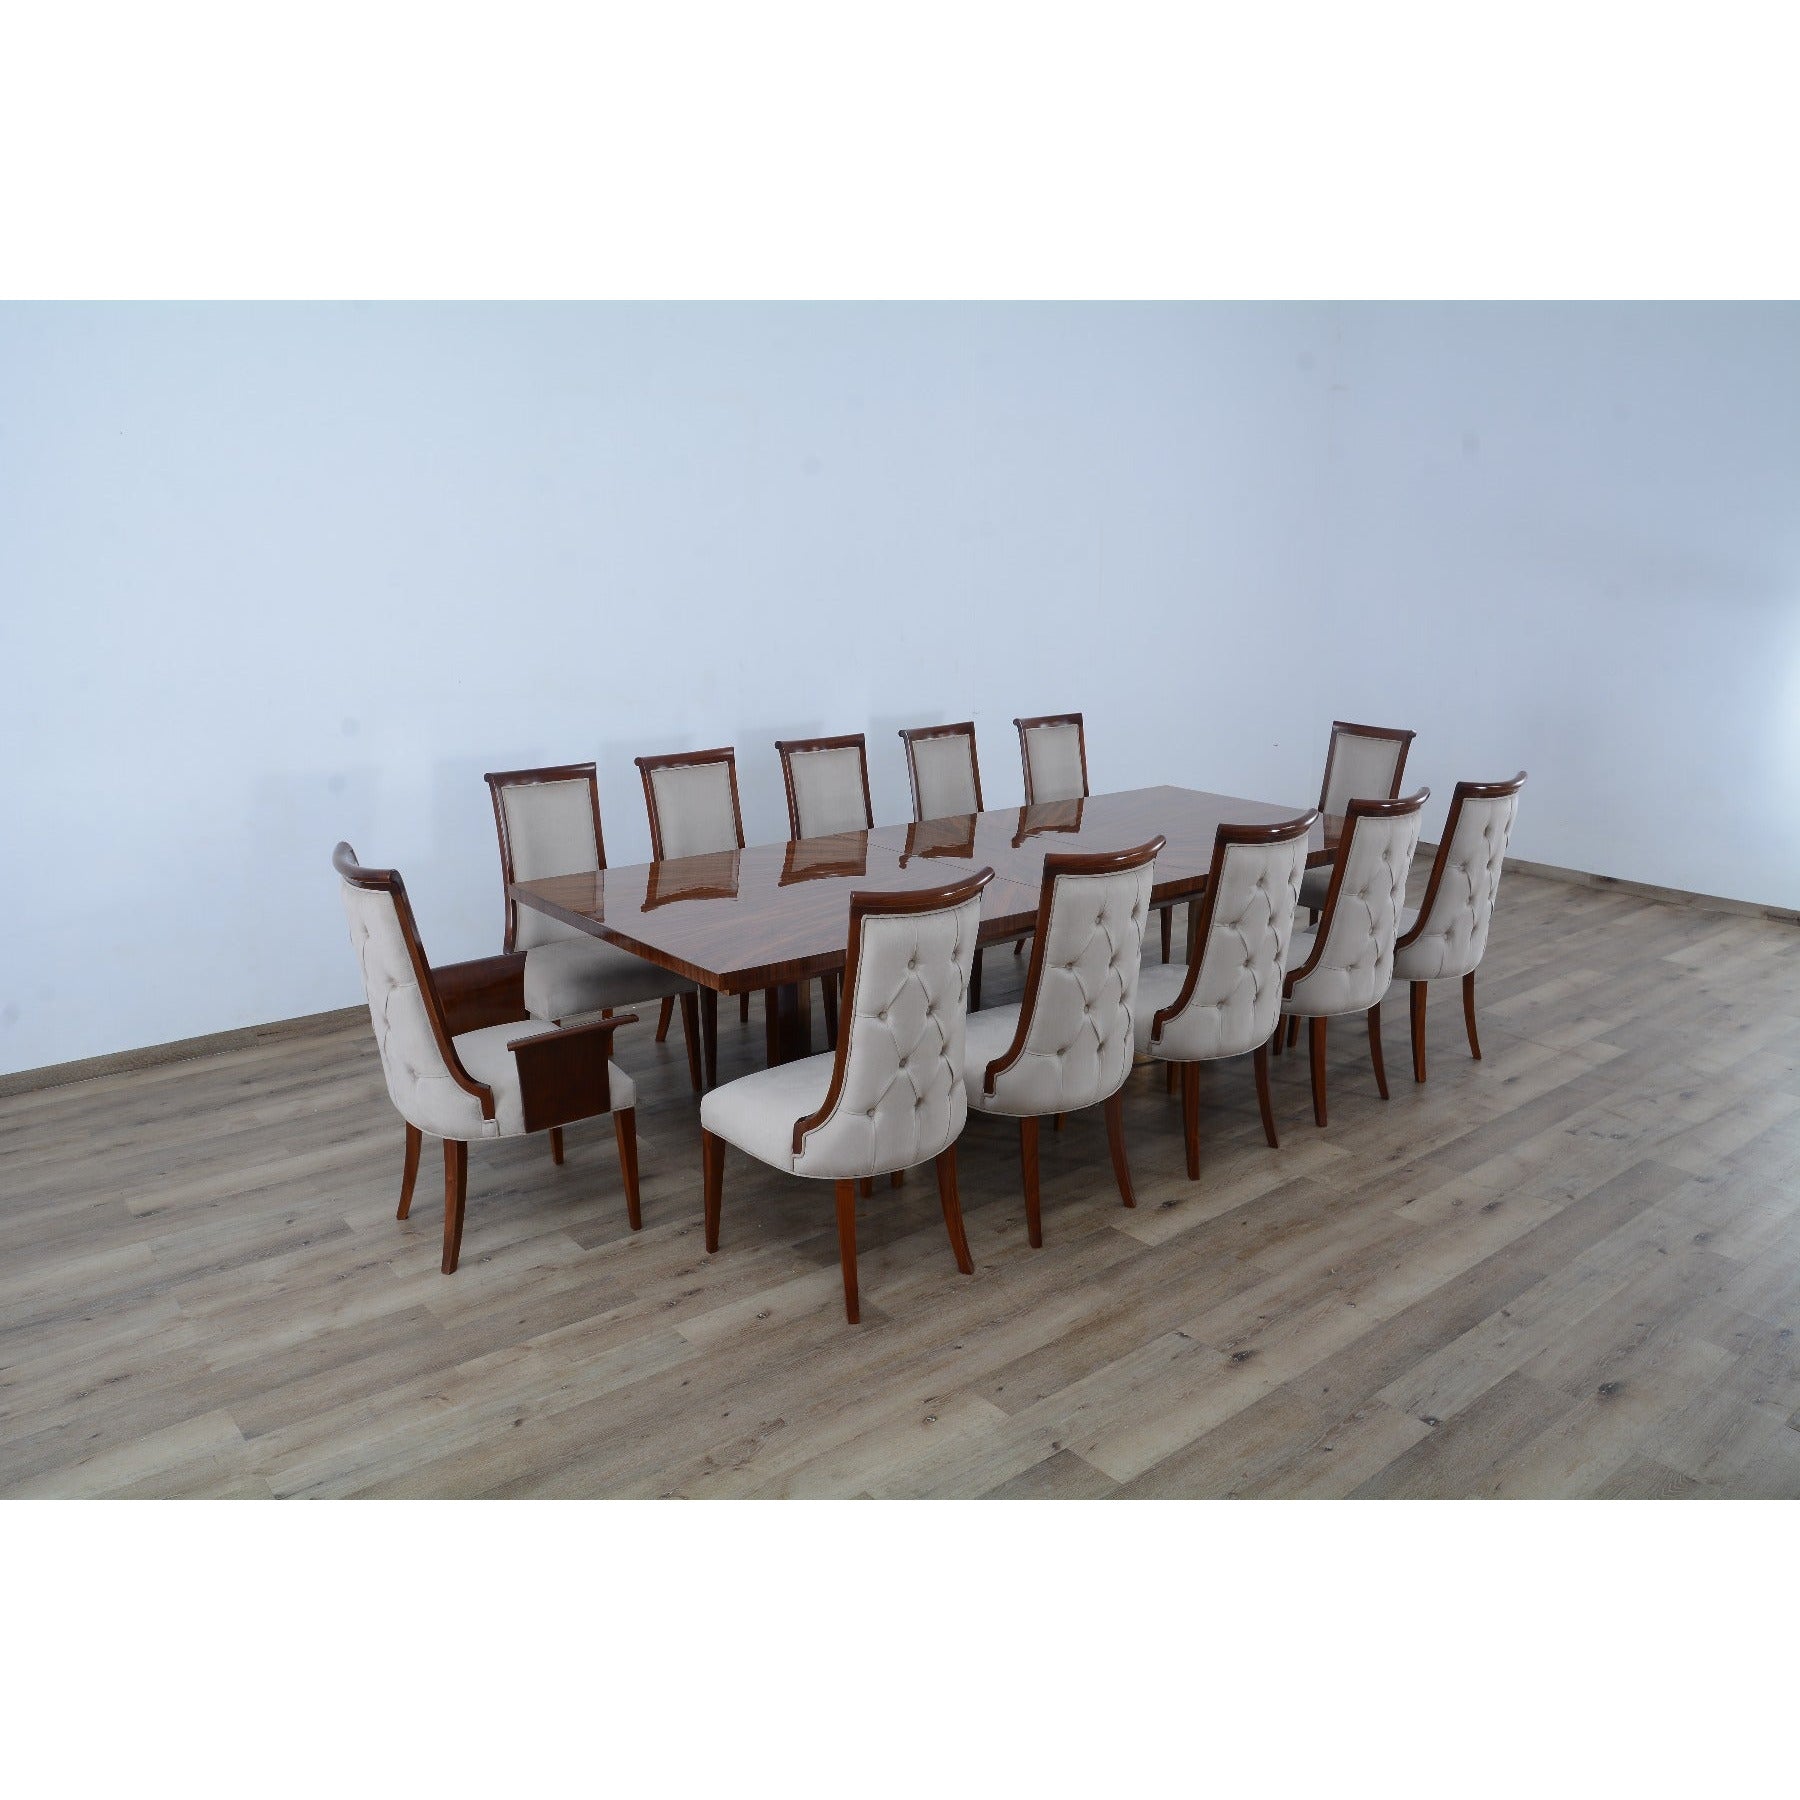 European Furniture - Glamour 11 Piece Dining Room Set in Brown - 56015-11SET - New Star Living